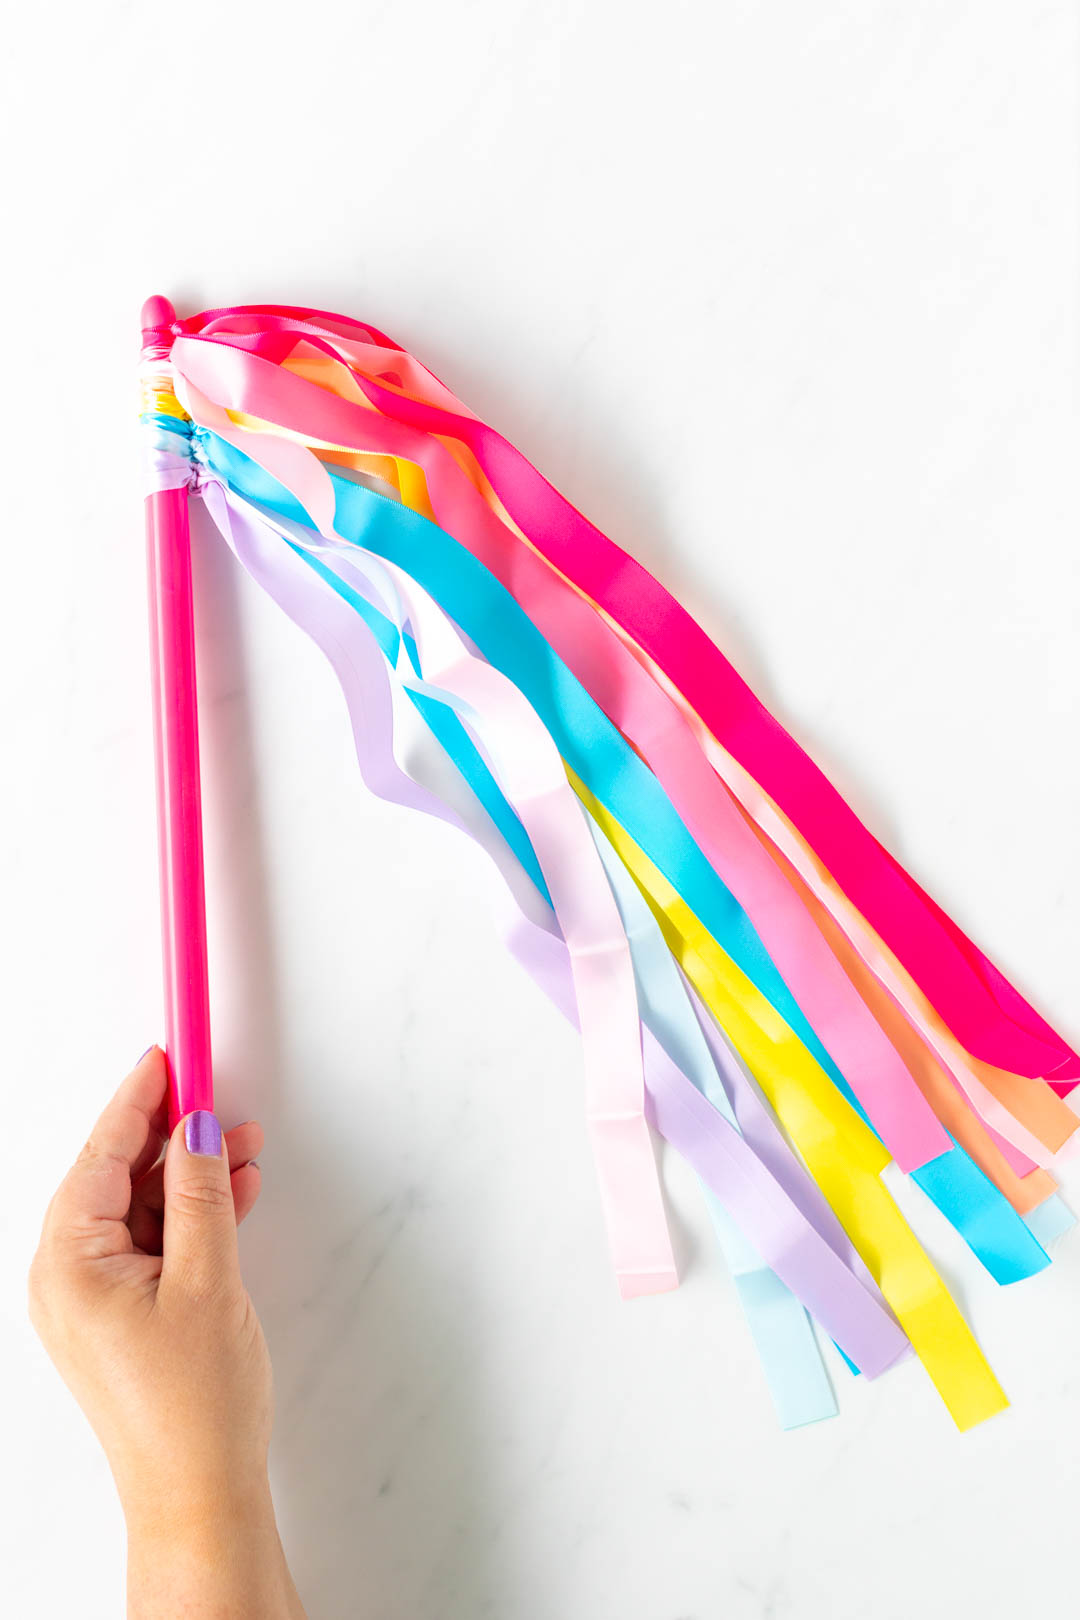 woman holding a dancing wand. a pink drumstick with ribbons in various colors